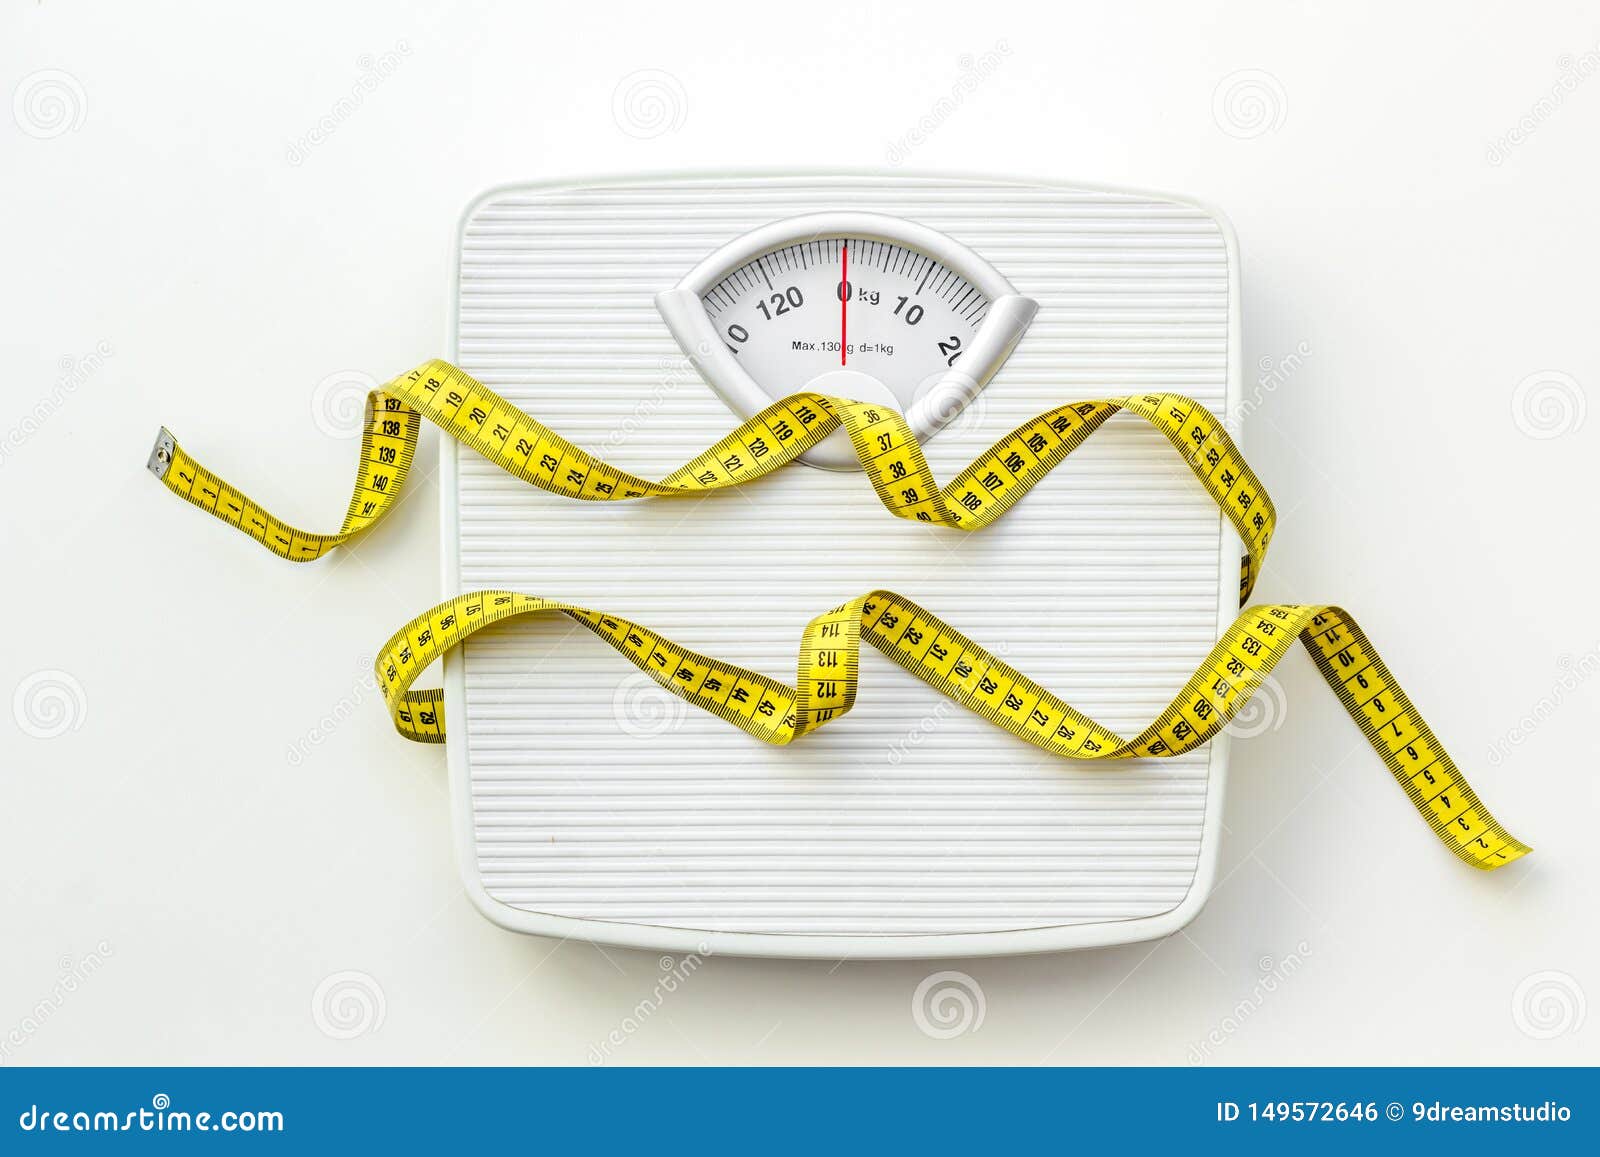 https://thumbs.dreamstime.com/z/slim-medical-starvation-diet-concept-scale-measuring-tape-weight-loss-white-background-top-view-149572646.jpg